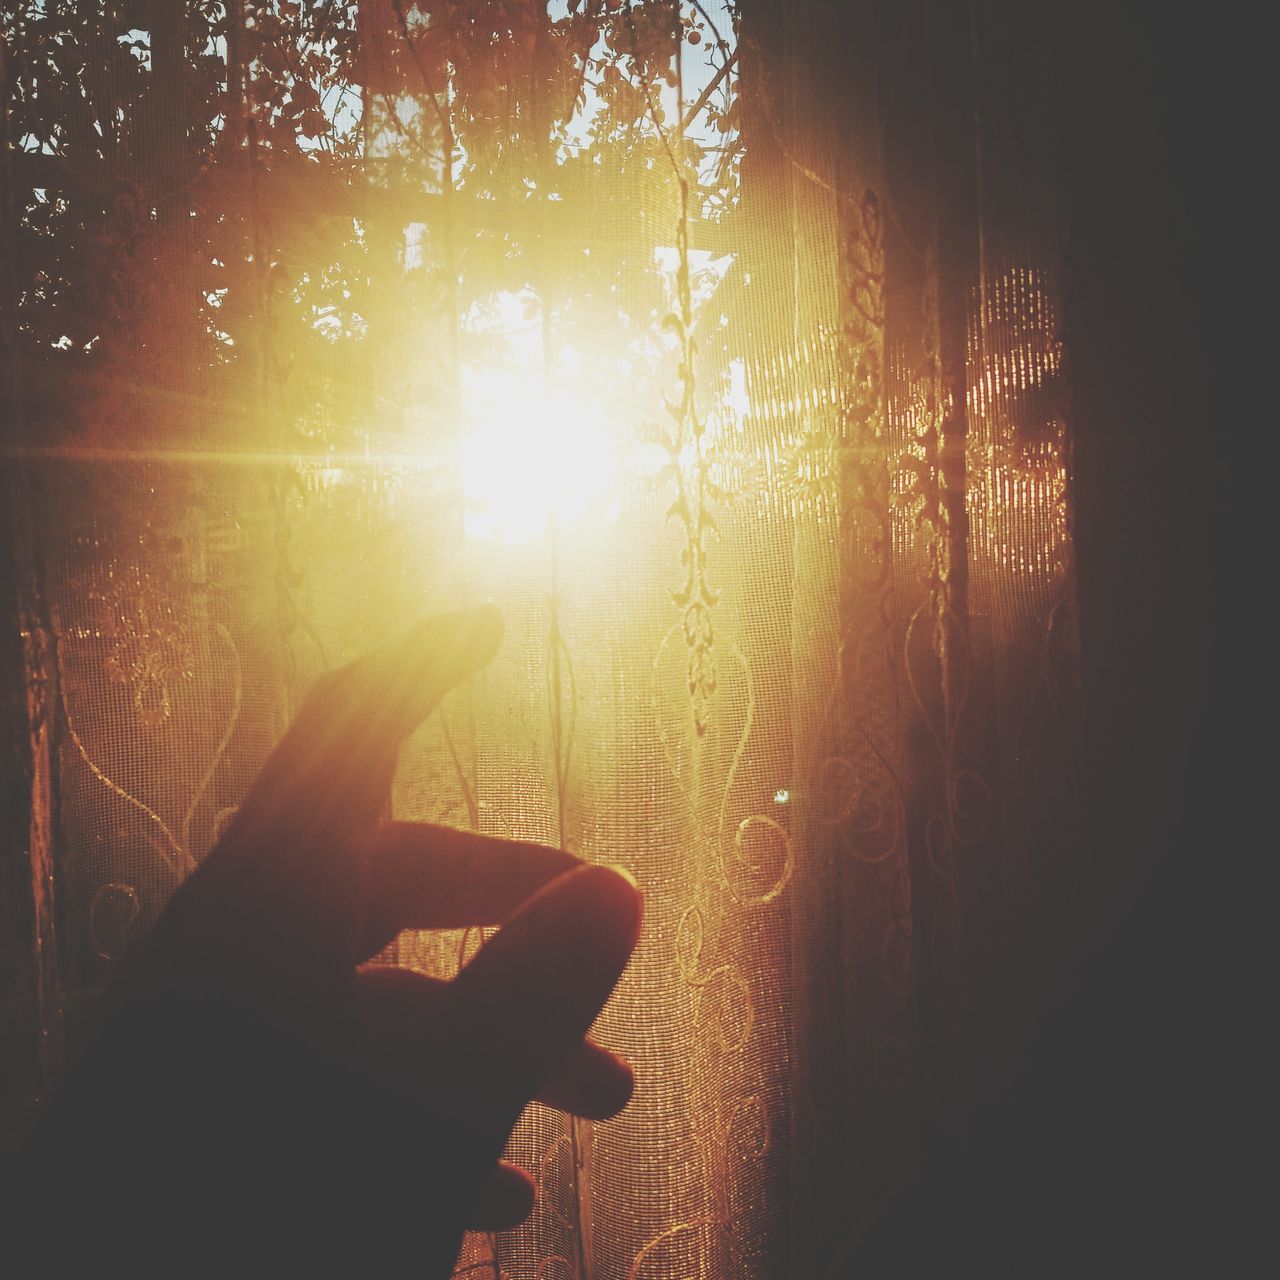 sunlight, light, one person, morning, hand, darkness, nature, tree, plant, sun, lens flare, sunbeam, reflection, lifestyles, silhouette, back lit, backlighting, outdoors, leisure activity, adult, day, sky, holding, yellow, finger